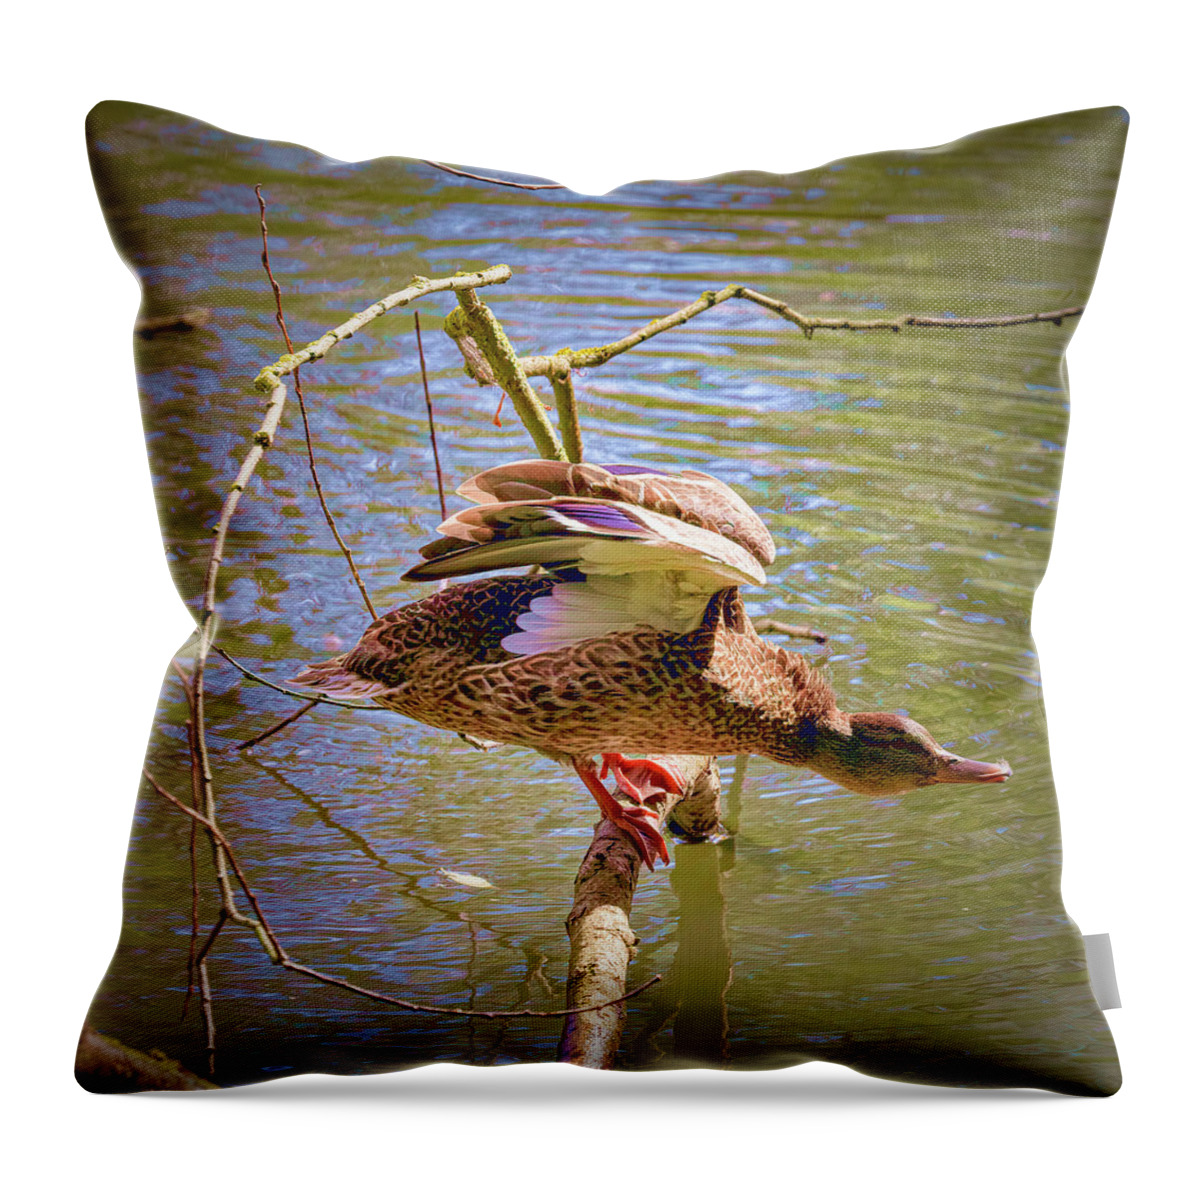 Posing Model Throw Pillow featuring the photograph Posing Model #i0 by Leif Sohlman